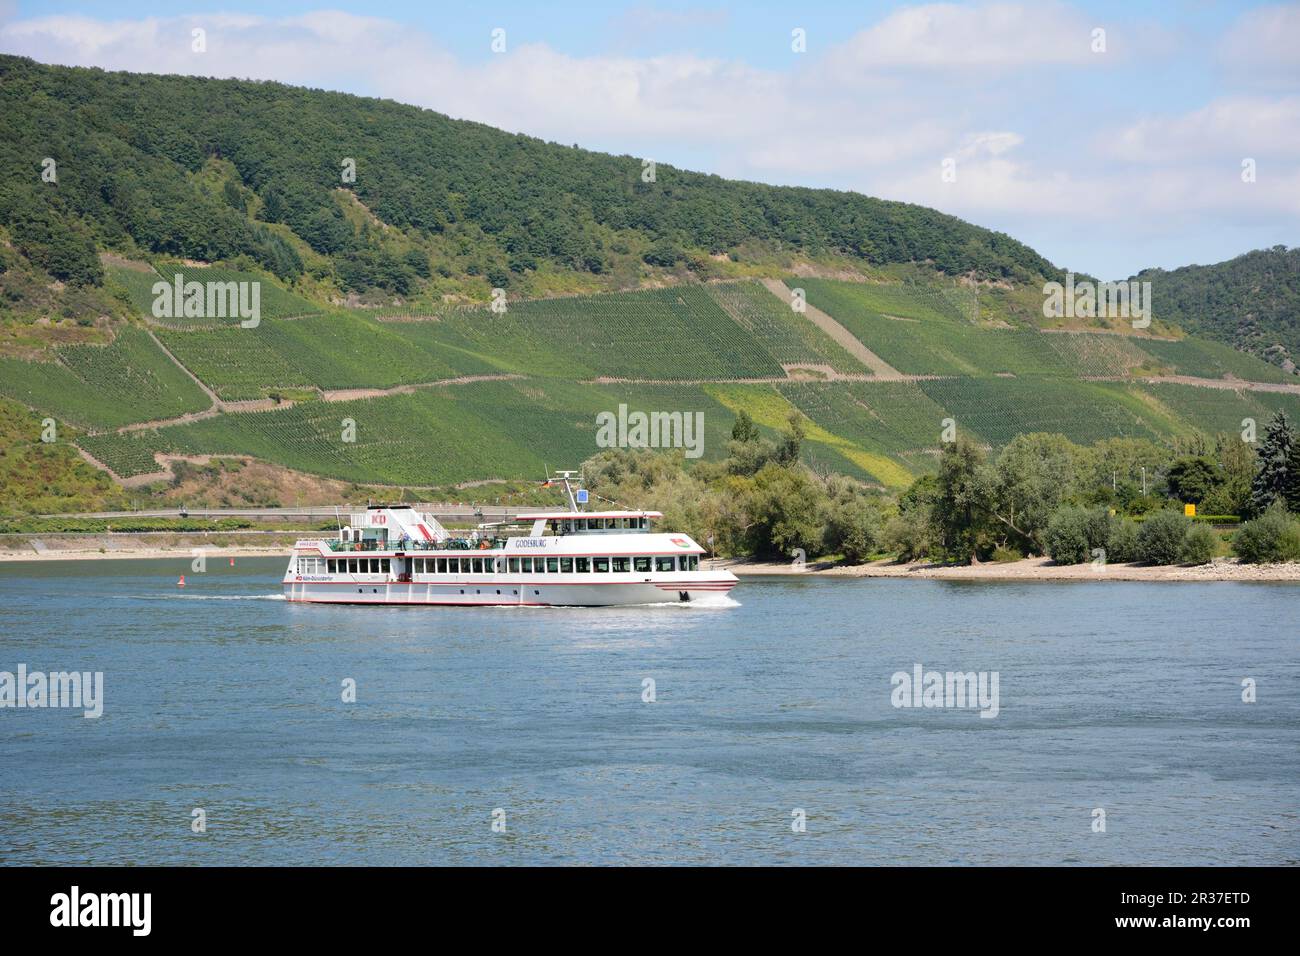 BOPPARD, GERMANY, SEPTEMBER 2: Tourists making a ship round trip on the river Rhein in Boppard, Germany on September 2, 2013. The ship Godesburg Stock Photo